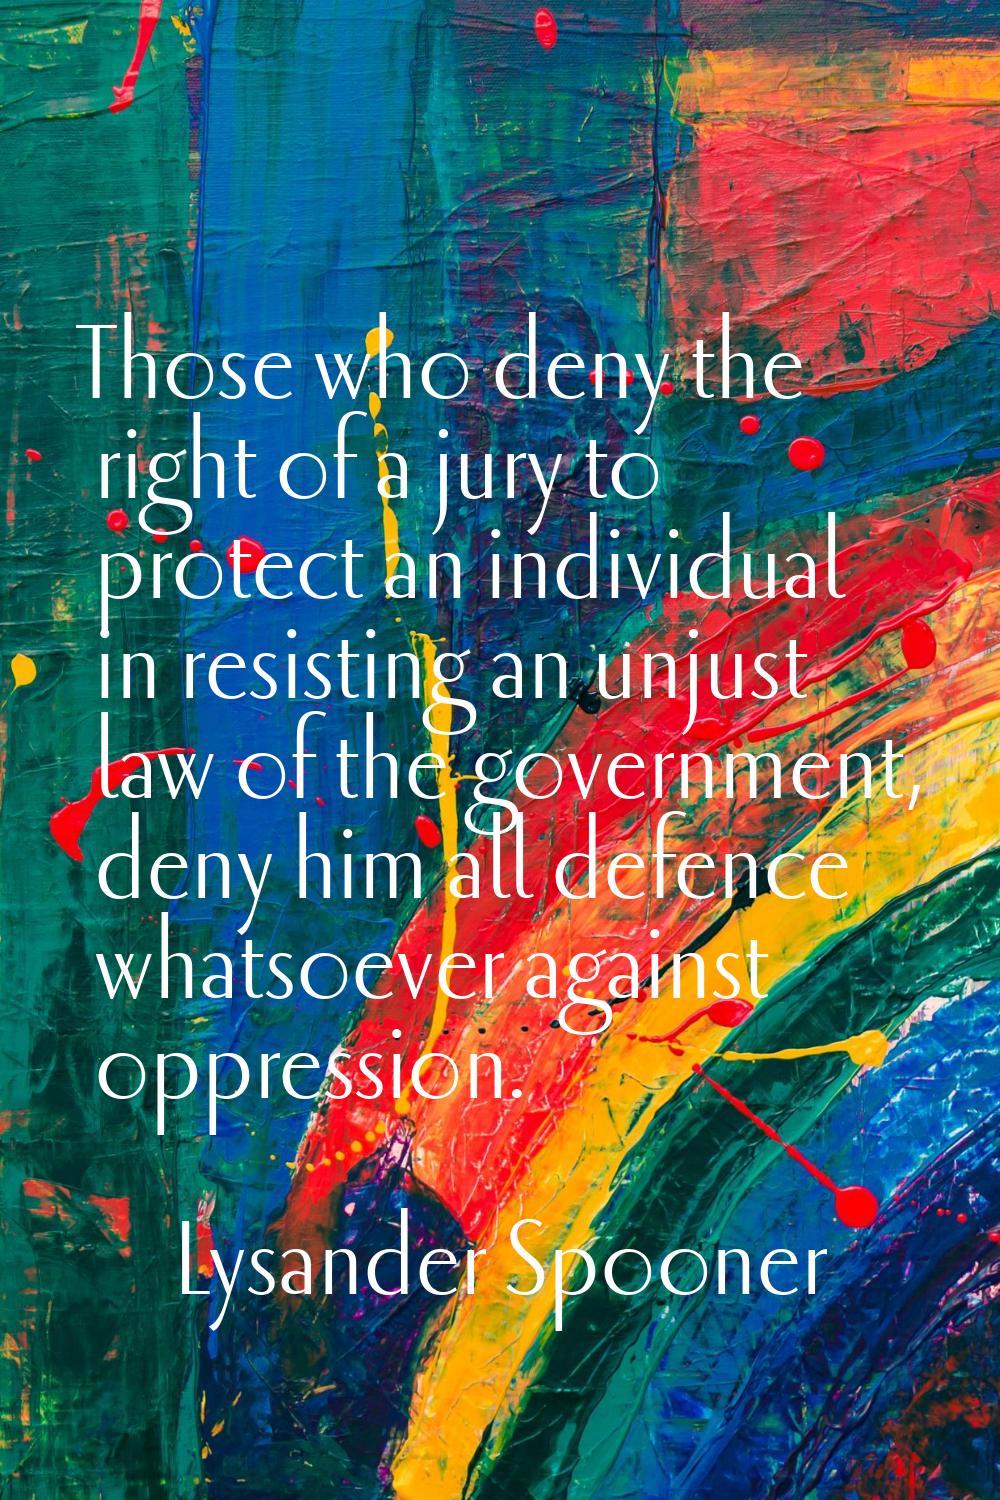 Those who deny the right of a jury to protect an individual in resisting an unjust law of the gover